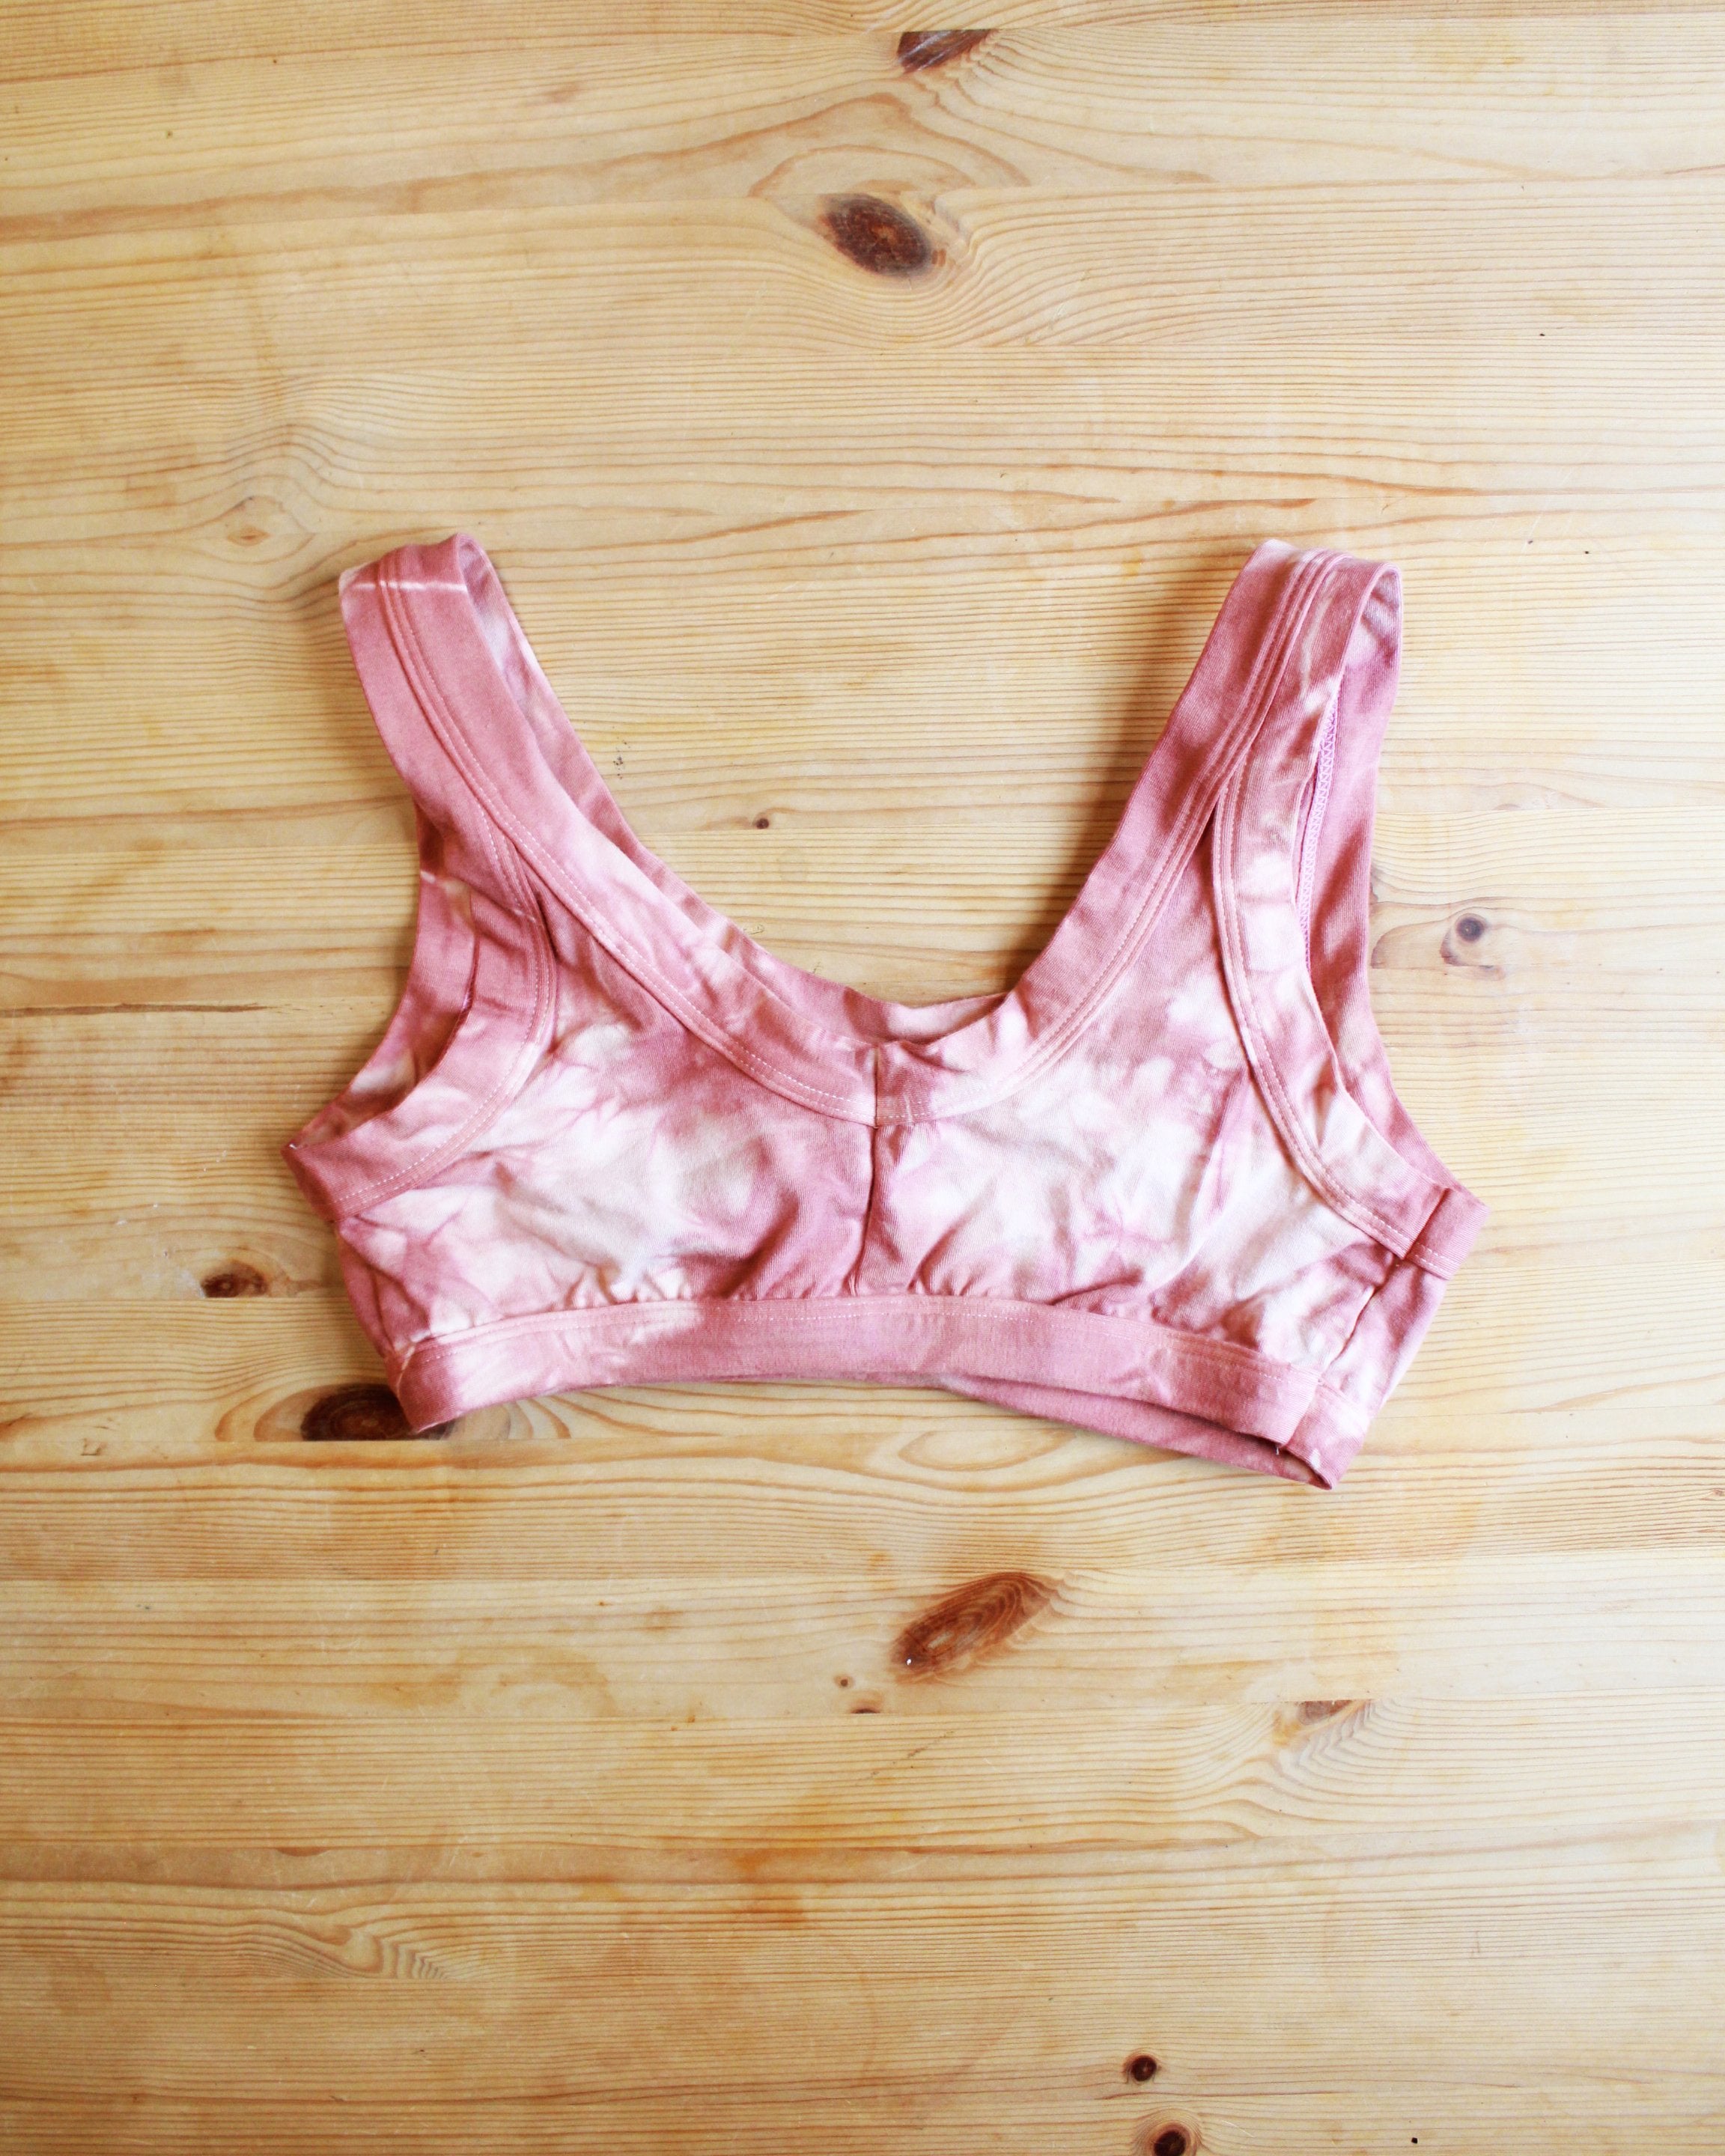 Flat-lay back of Thunderpants organic cotton Bralette in limited edition hand dyed pink shibori tie dye.